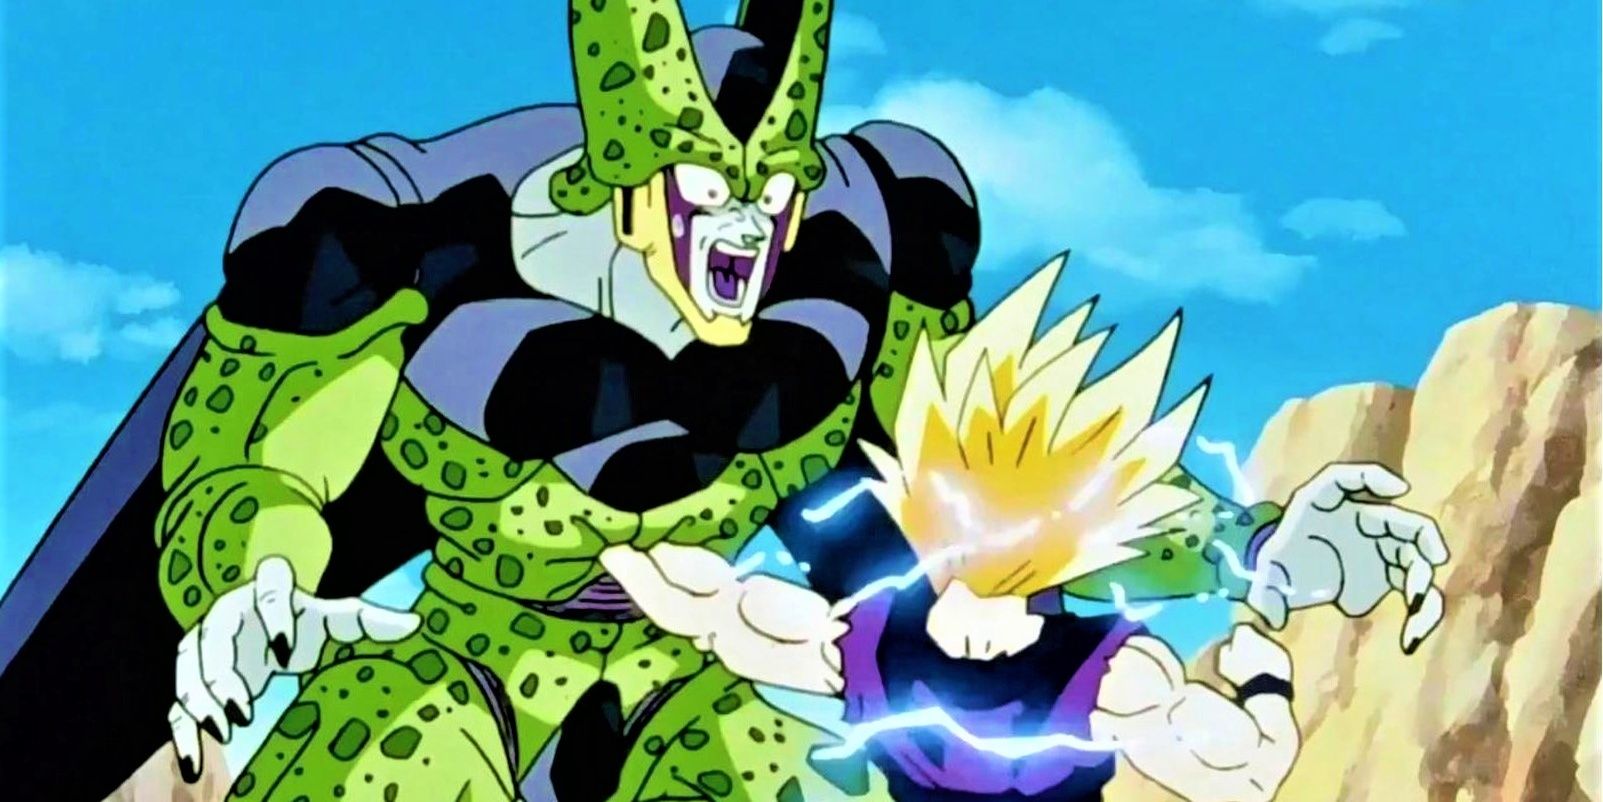 Gohan versus Cell from Dragon Ball Z